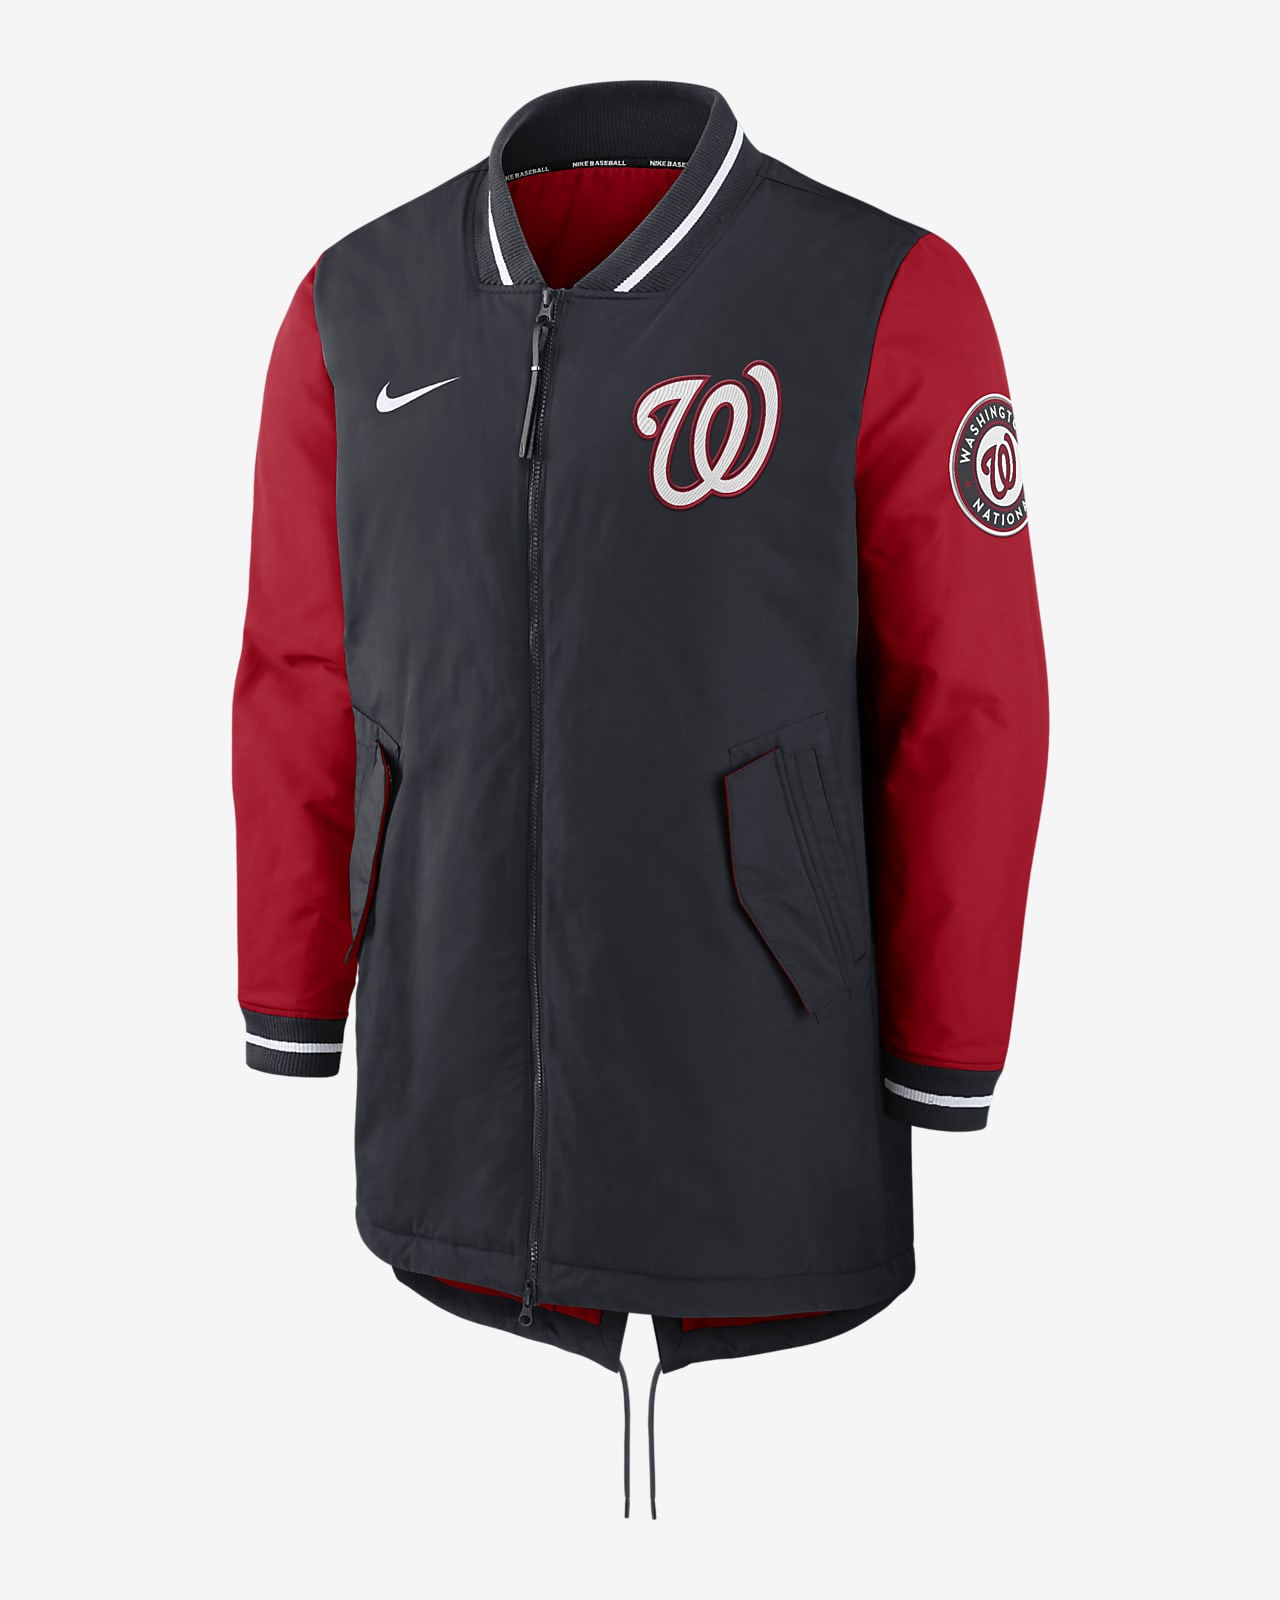 MLB - Our official review of the Washington Nationals' Nike City